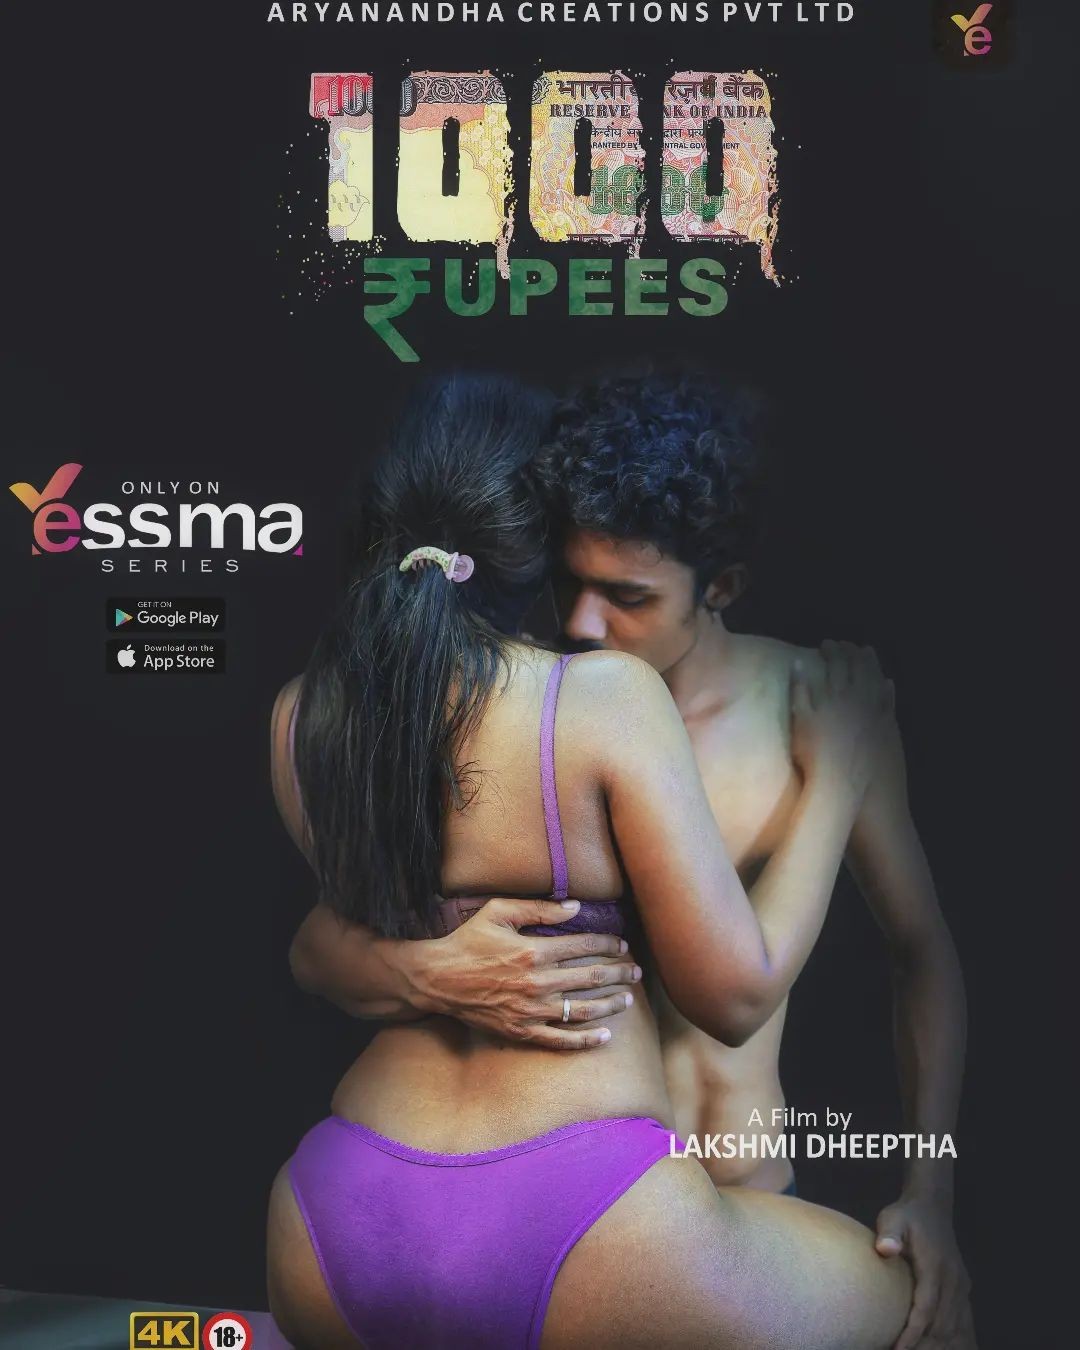 1000 Rupees 2022 S01E01 Yessma Web Series 720p HDRip 160MB Download